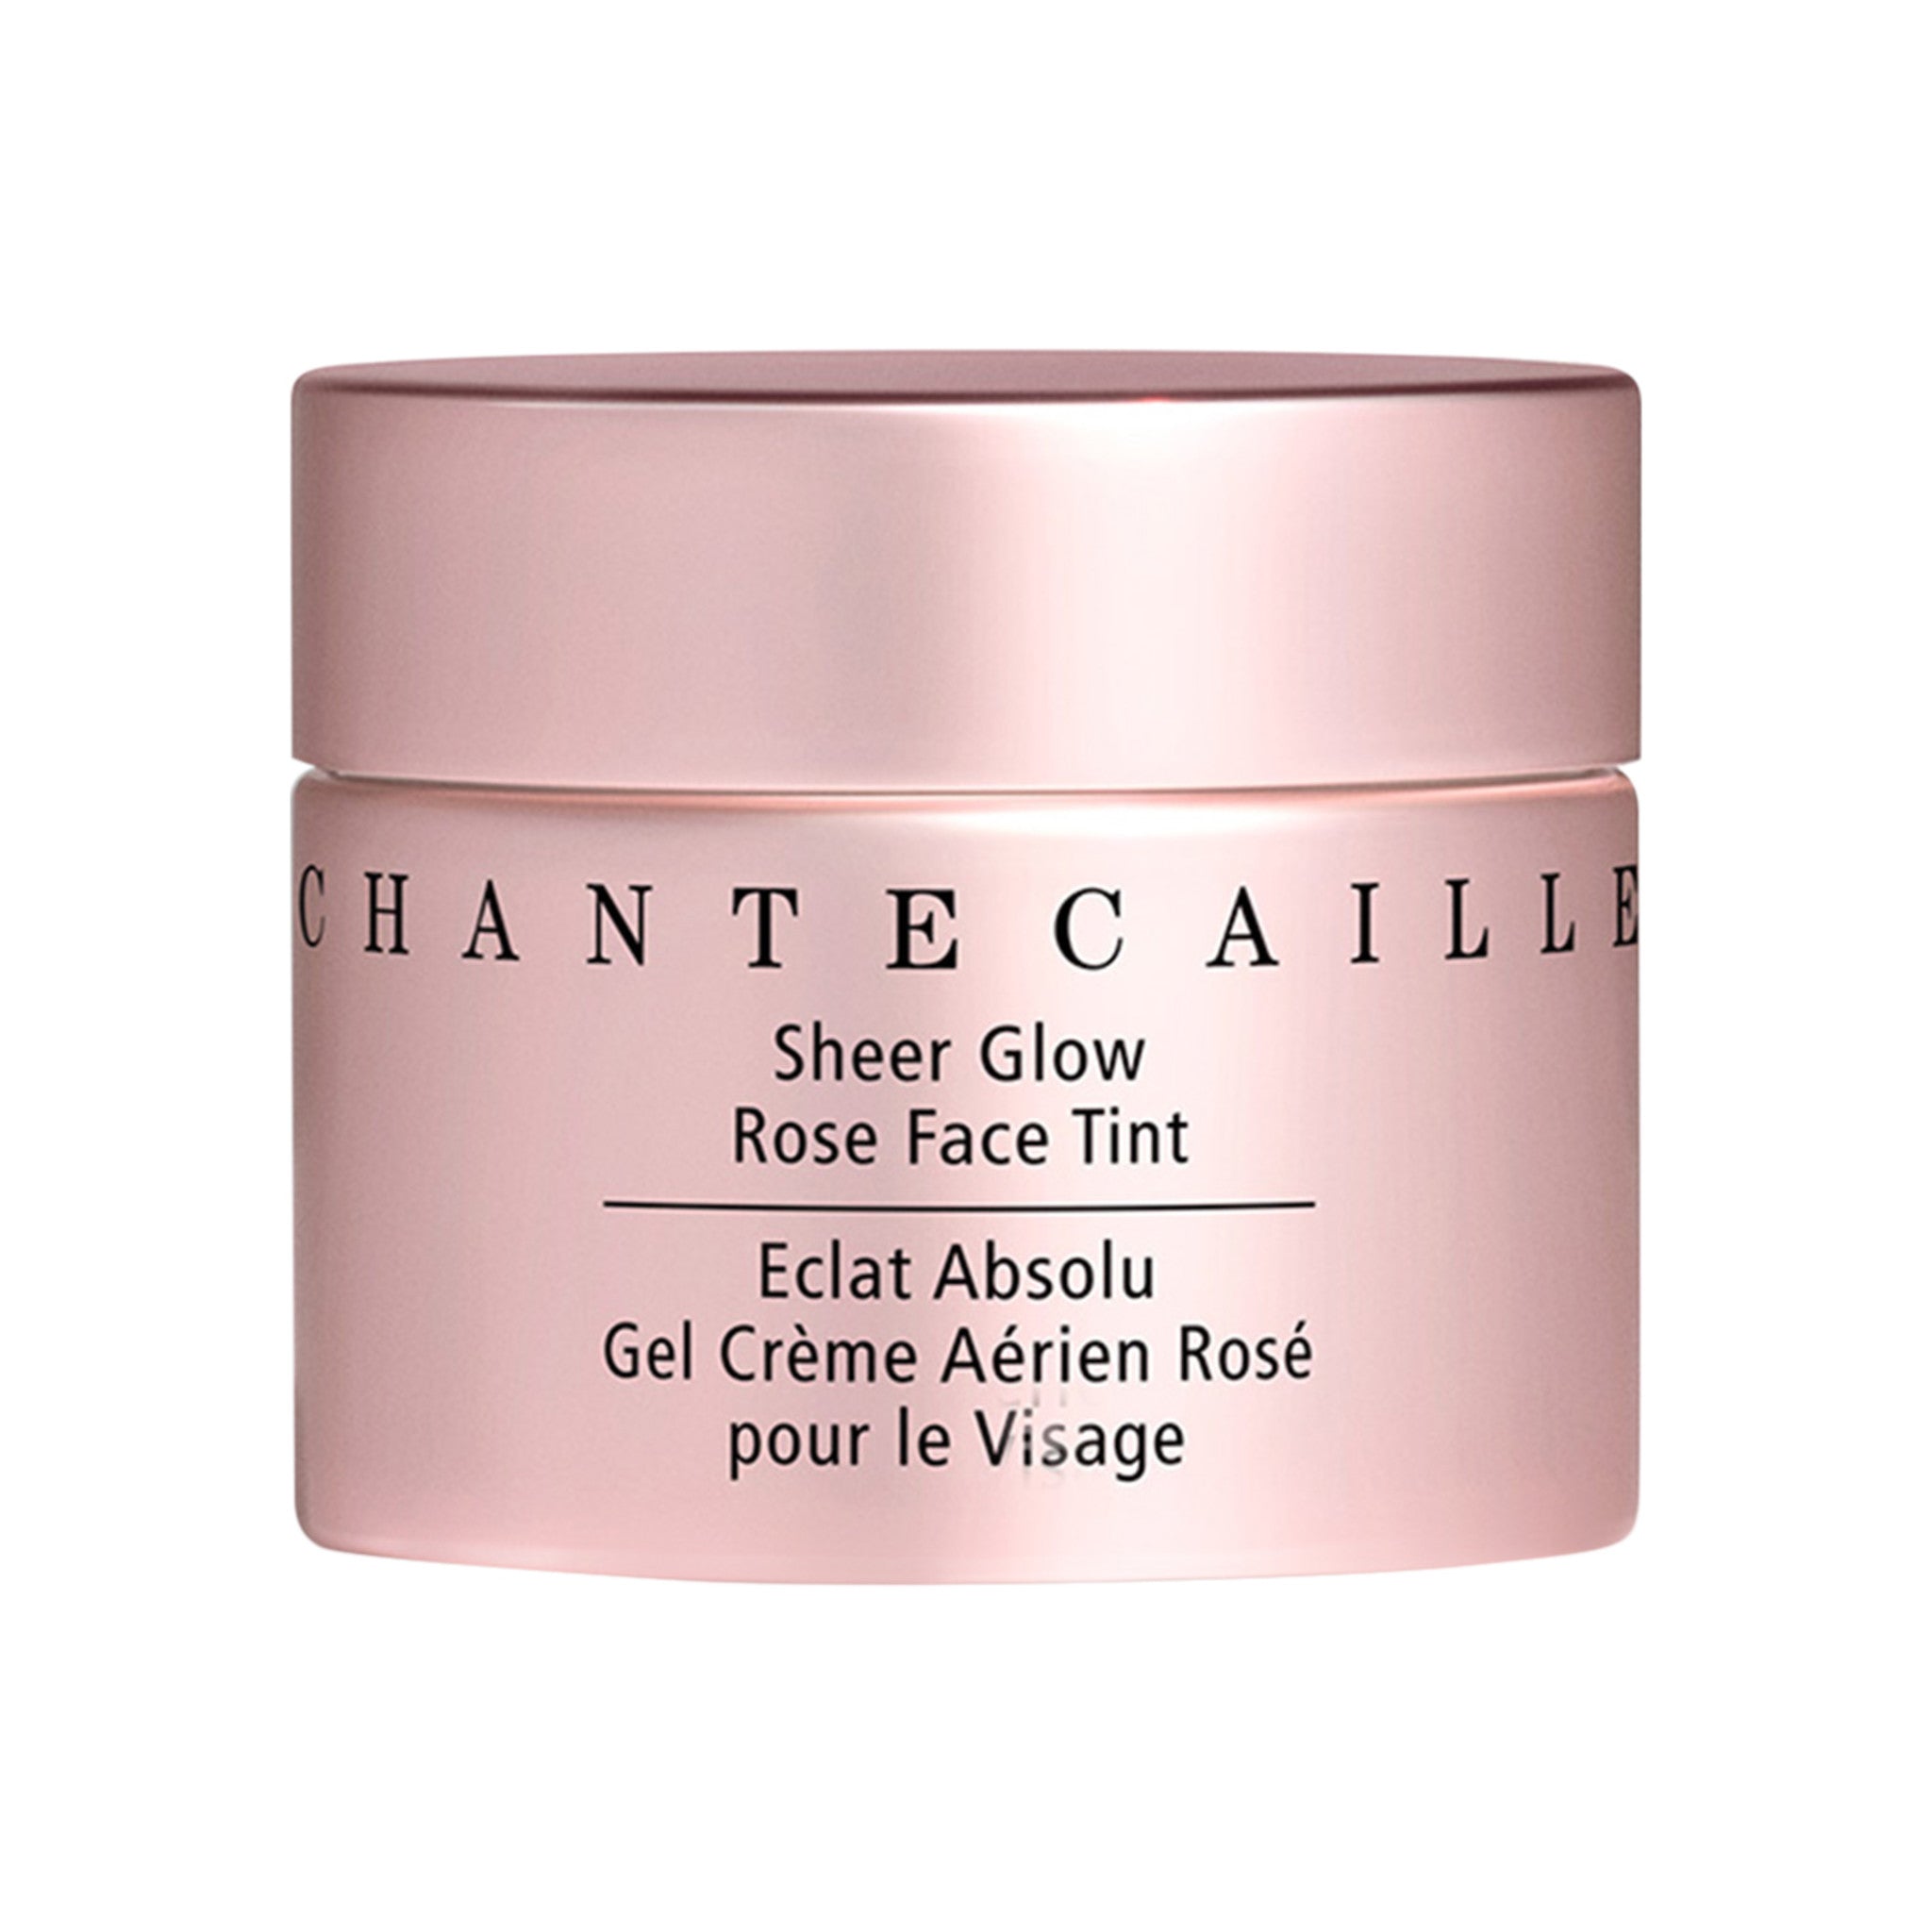 Chantecaille Sheer Glow Rose Face Tint main image. This product is in the color pink